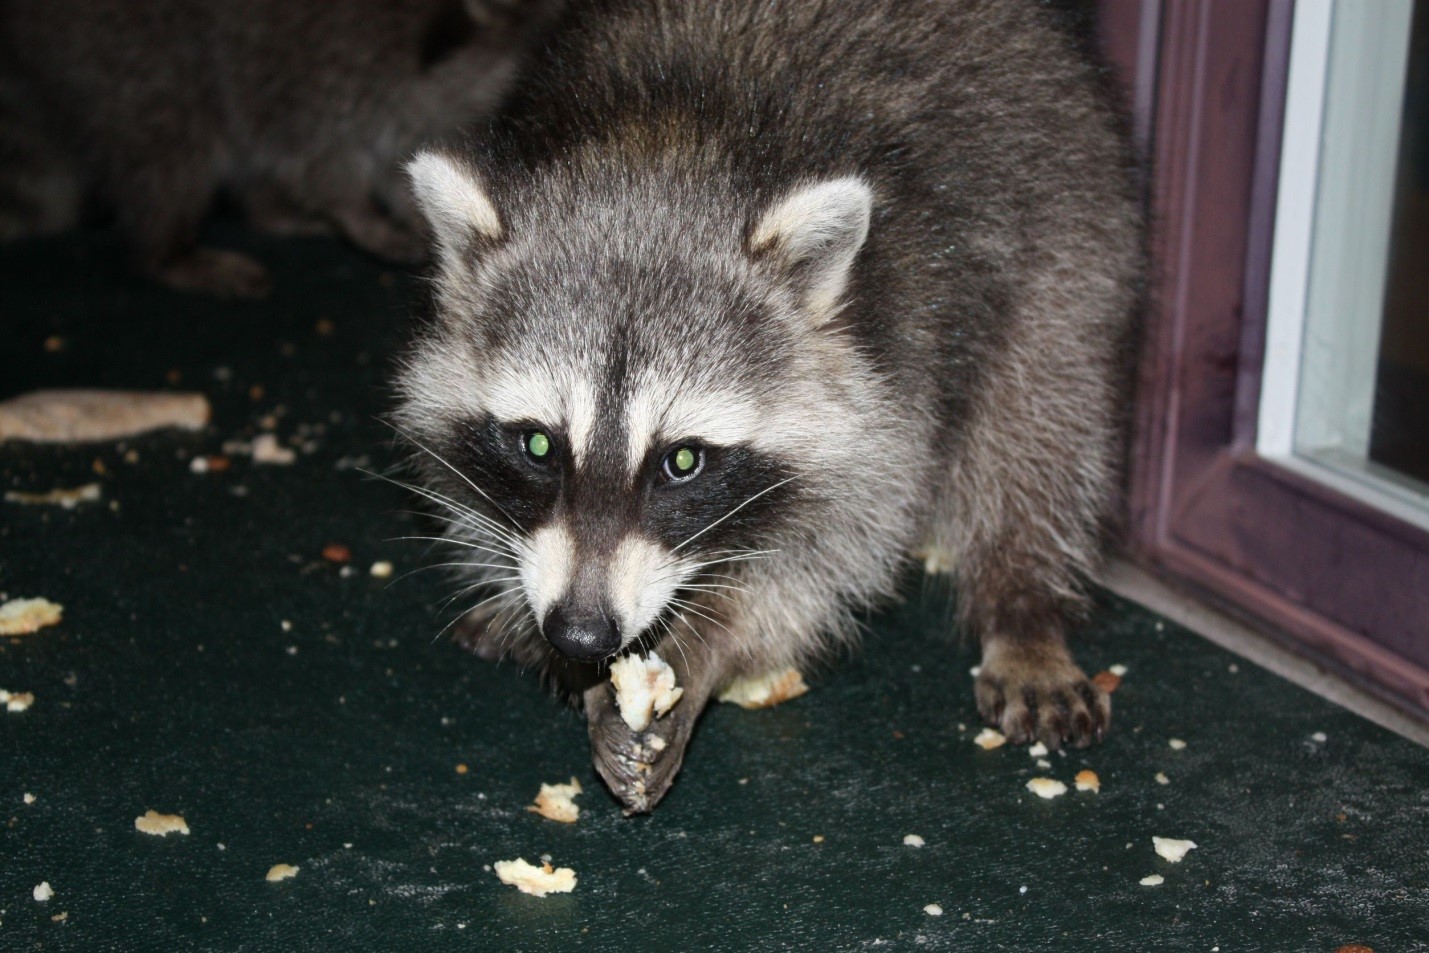 Toronto Sees Increase in Raccoons Infected with Canine Distemper Virus